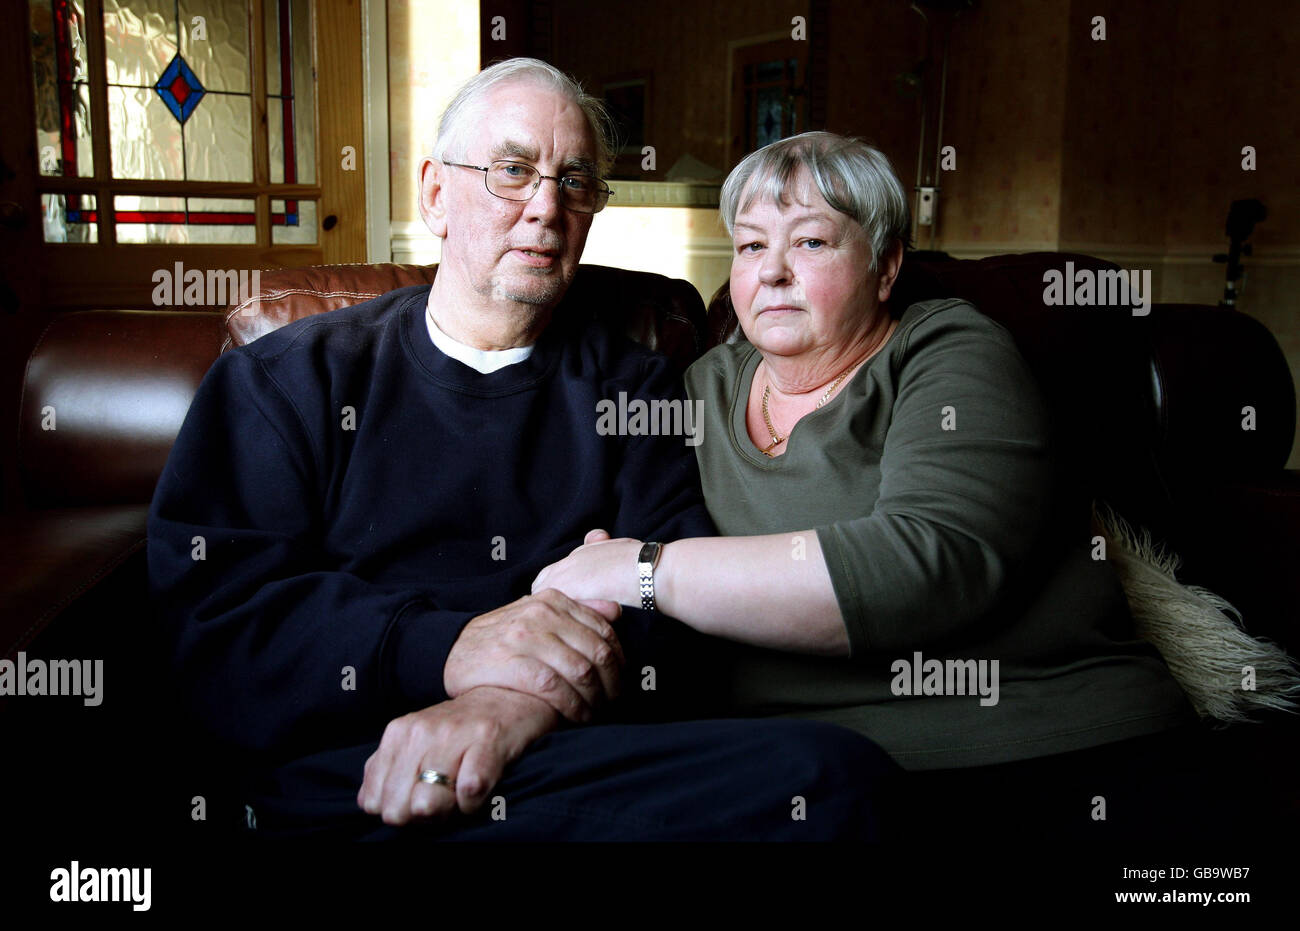 David Lloyd and Annette Edwards at their home in Sale. Stock Photo